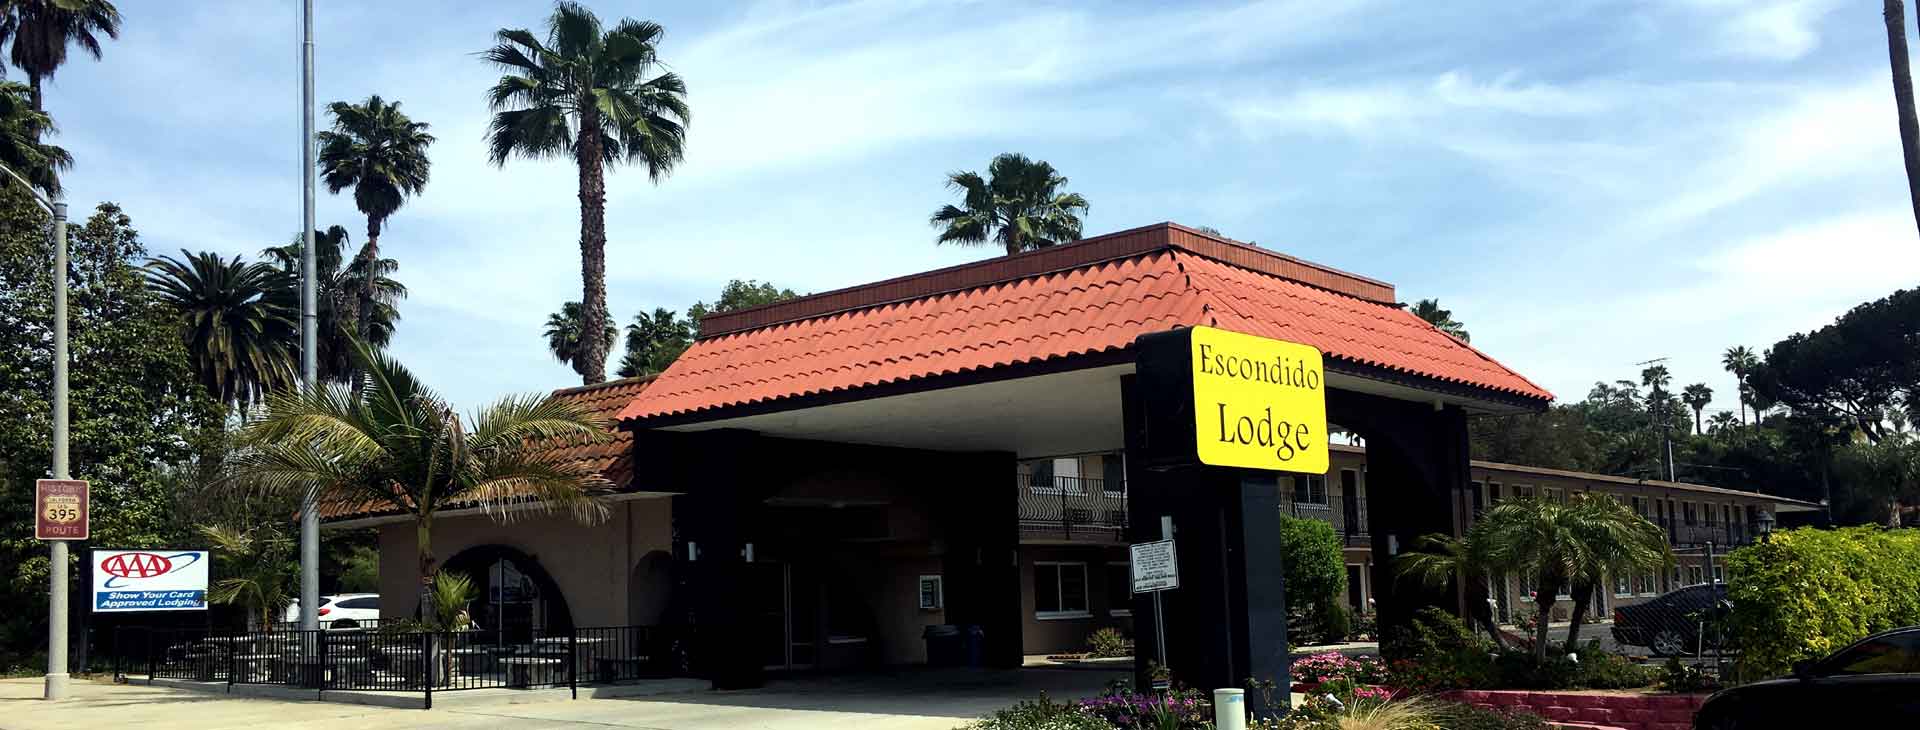 Front of Hotel Escondido Lodge